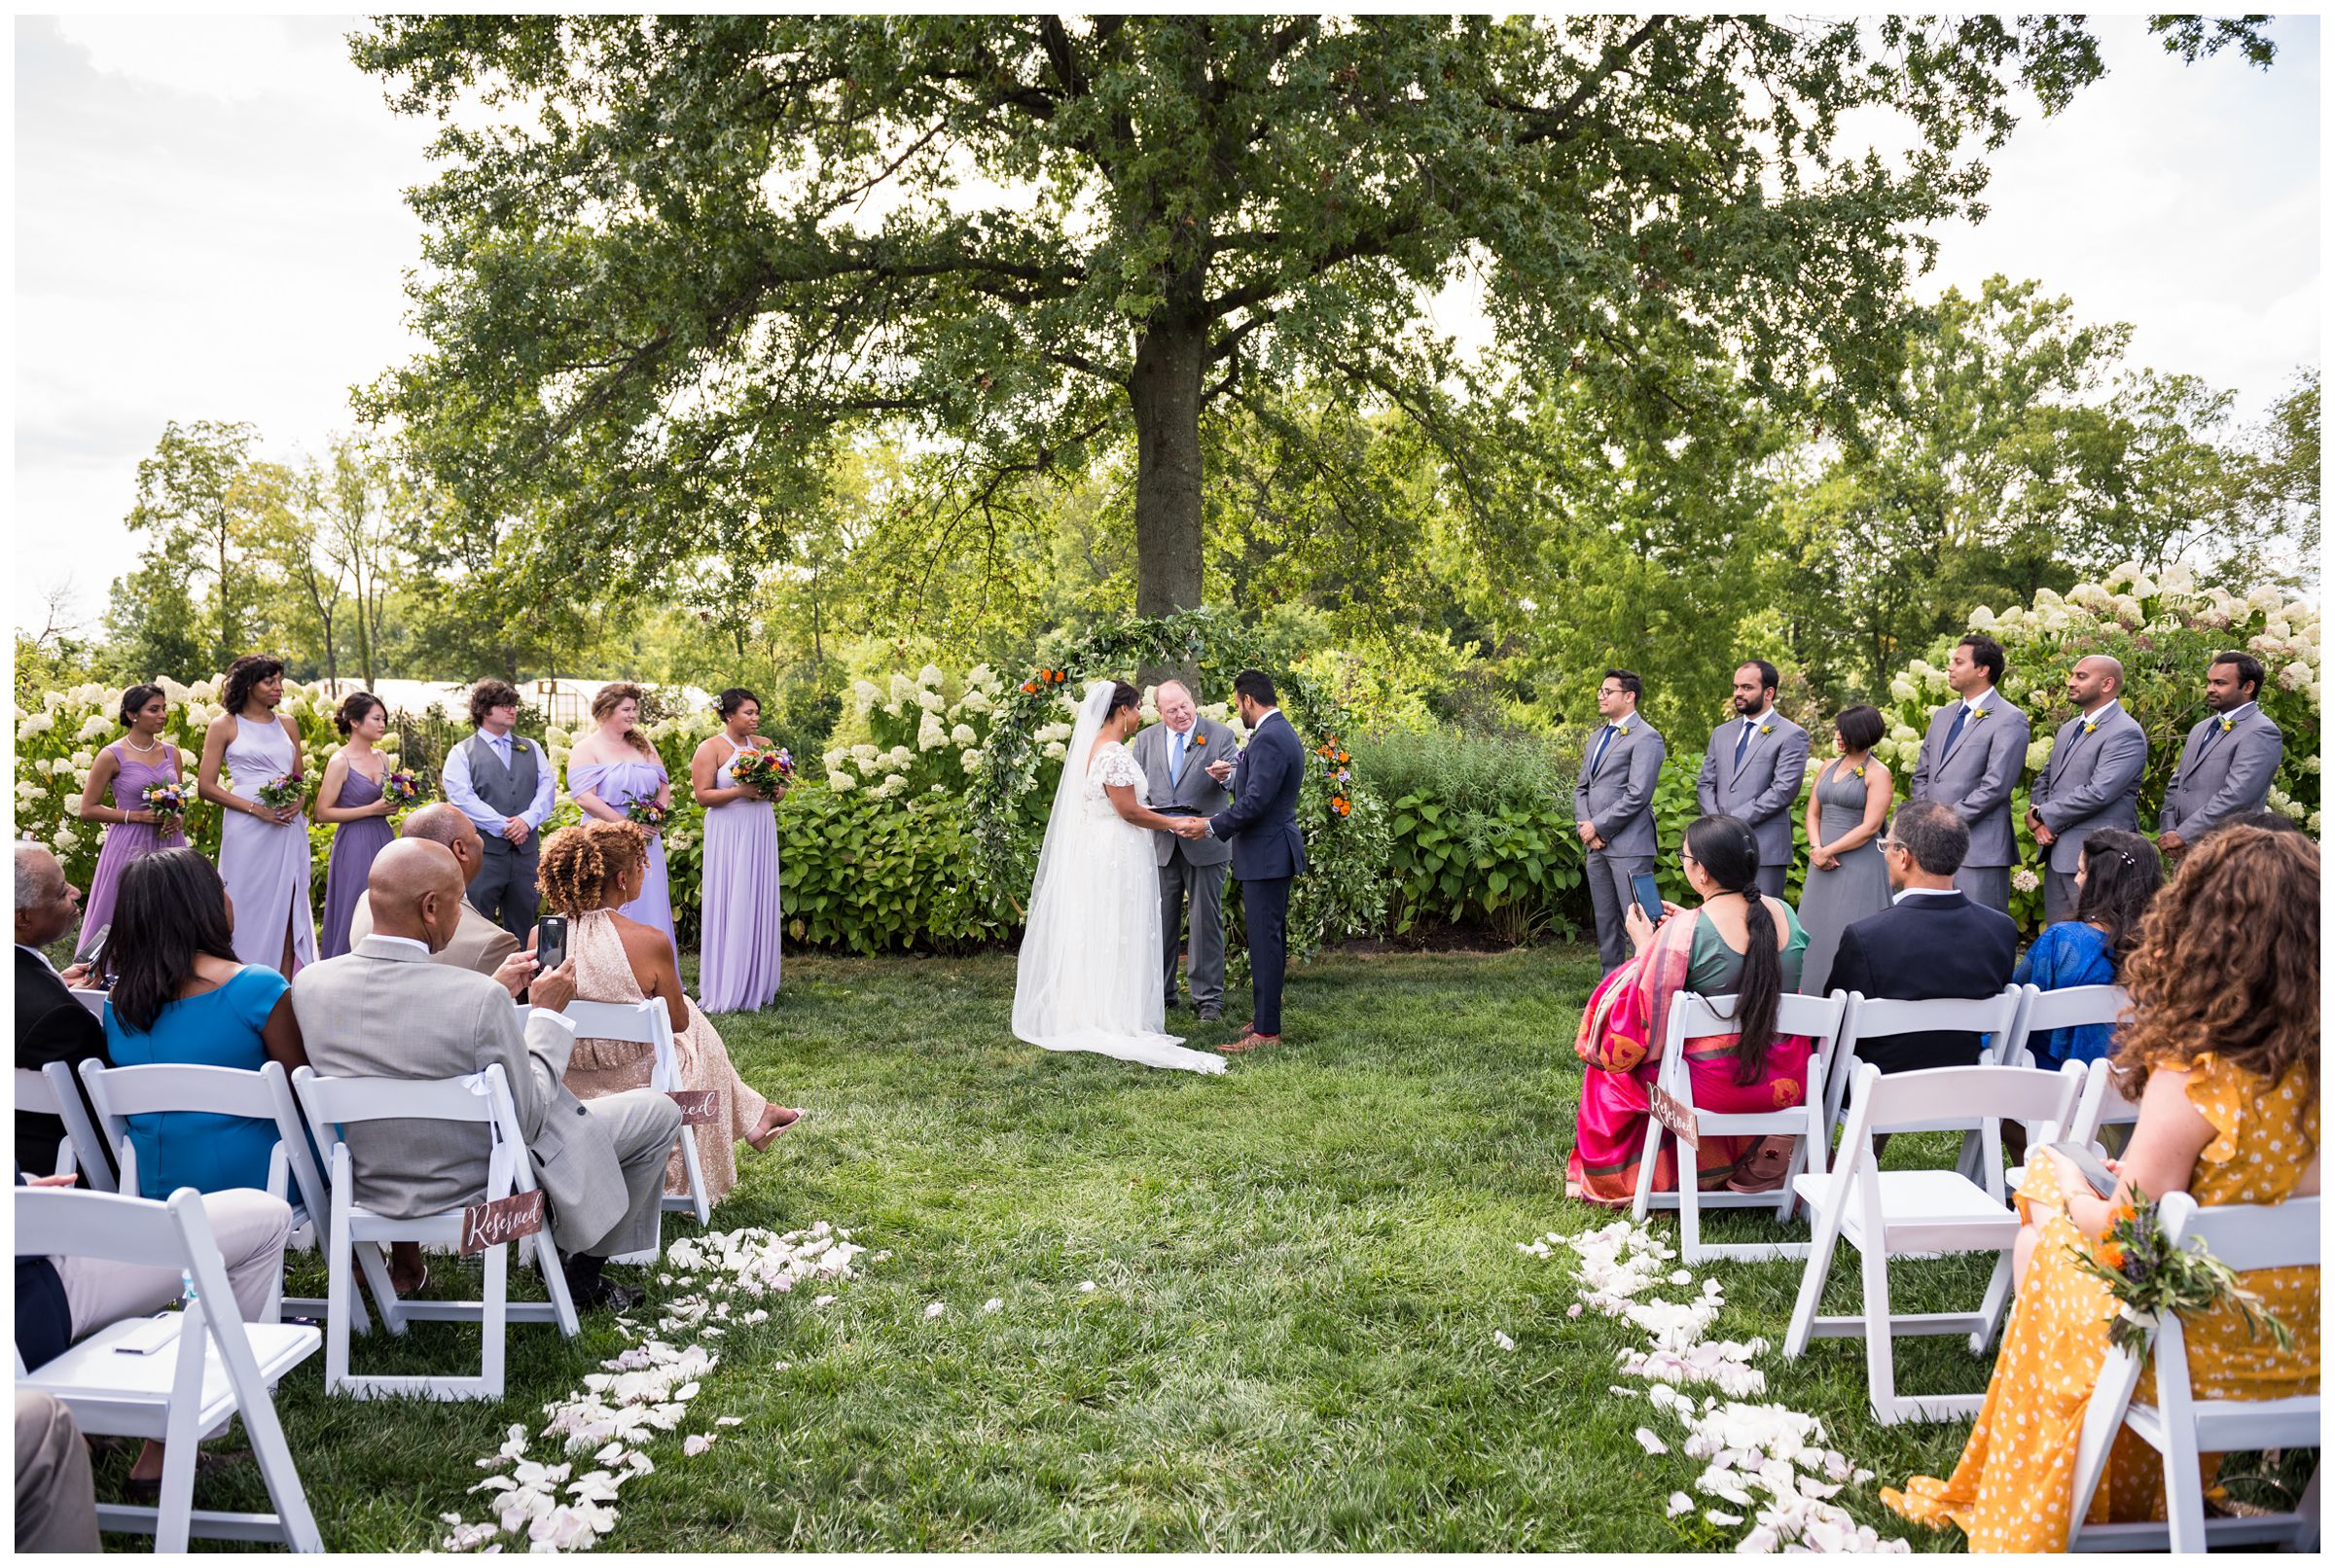 Jorgensen Farms wedding ceremony with Indian and African influences and diverse wedding party